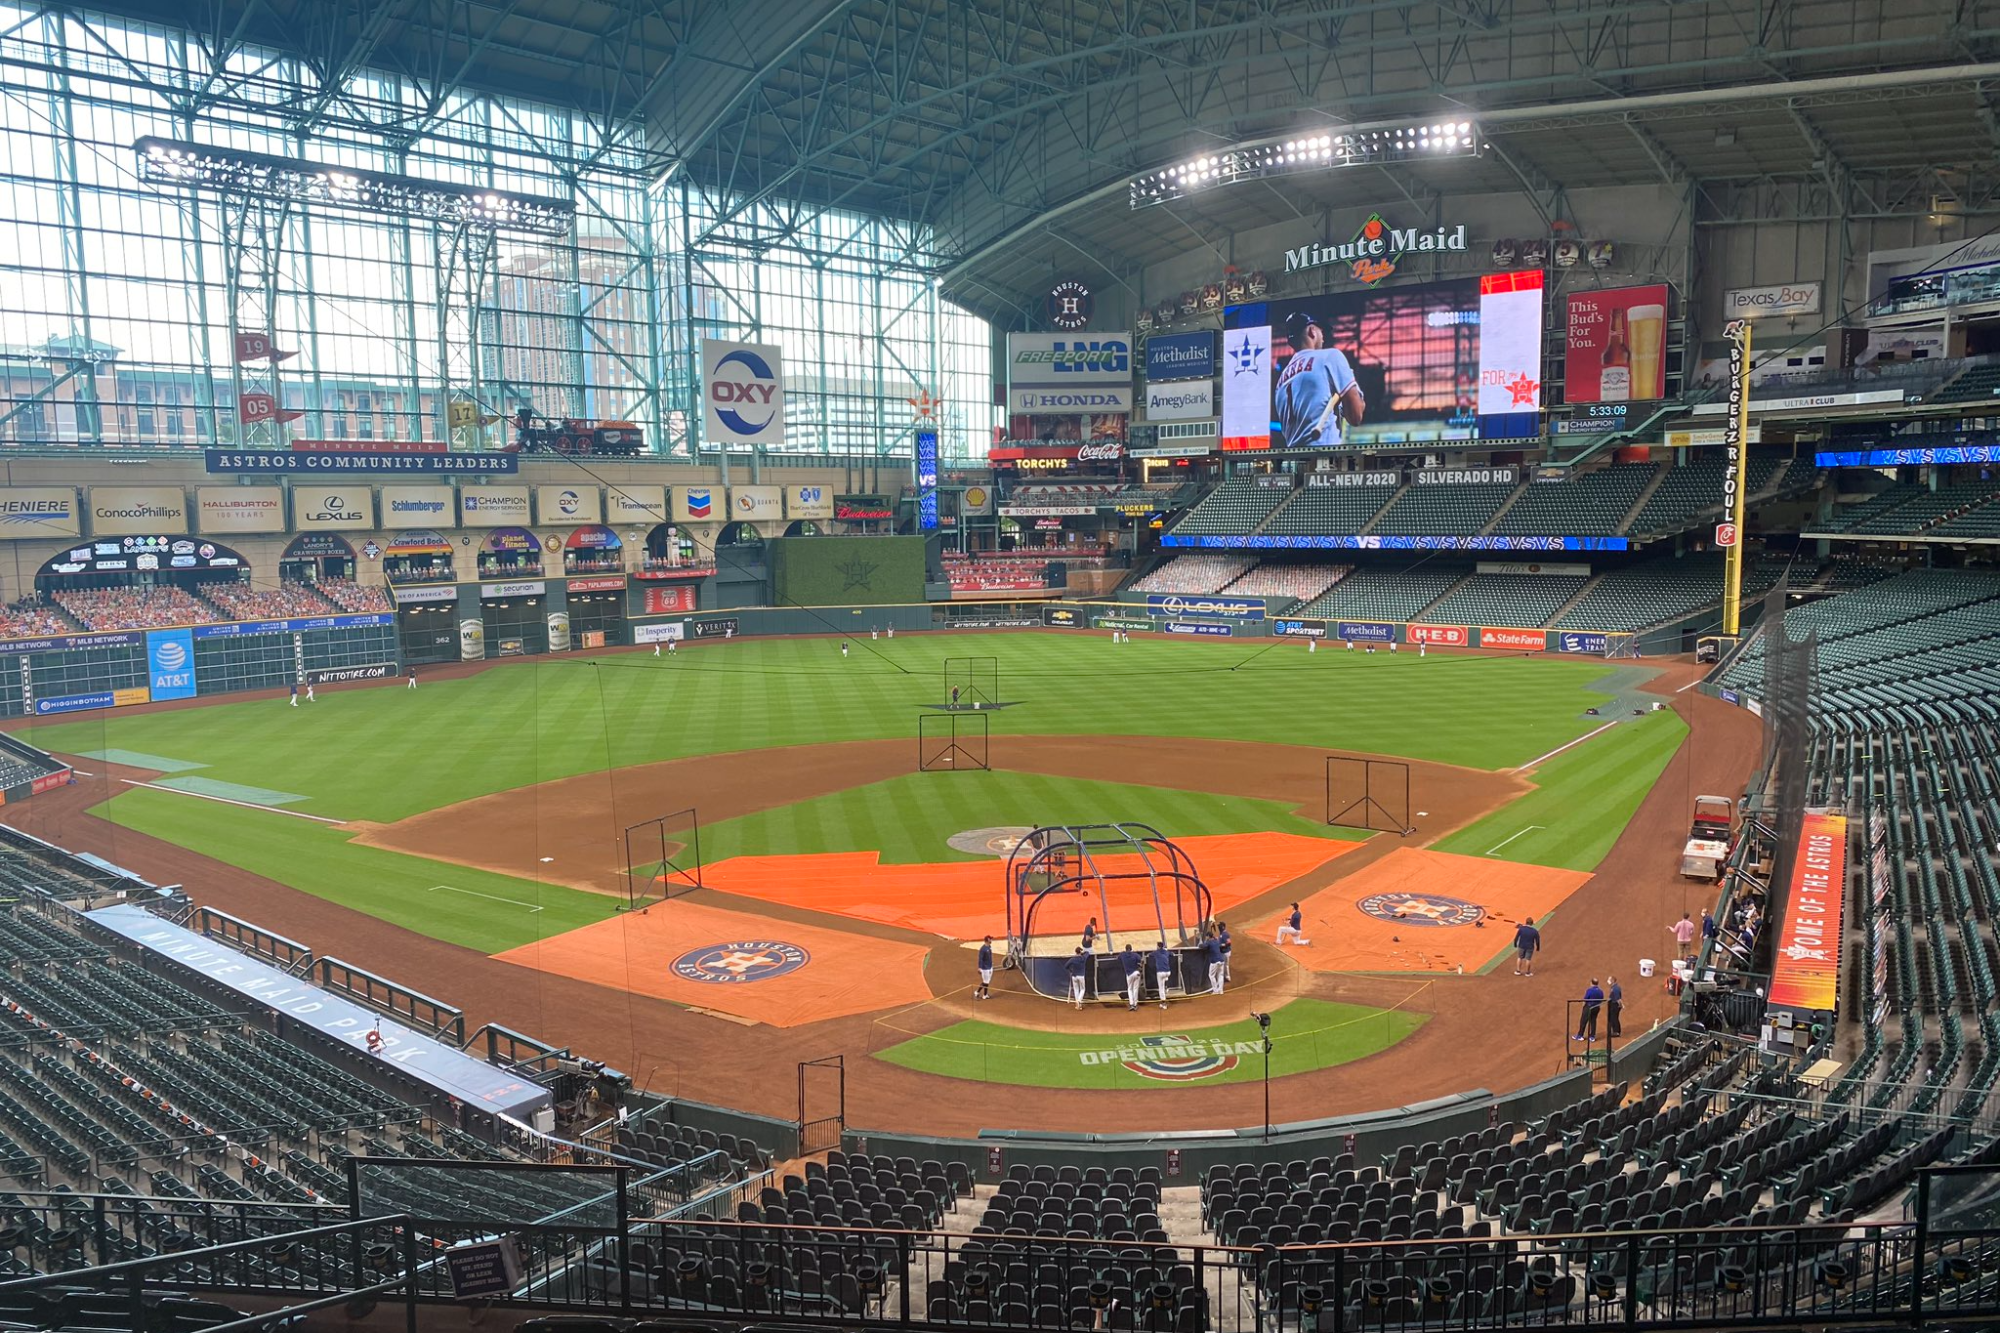 Minute Maid Park in Houston on July 28, 2020.